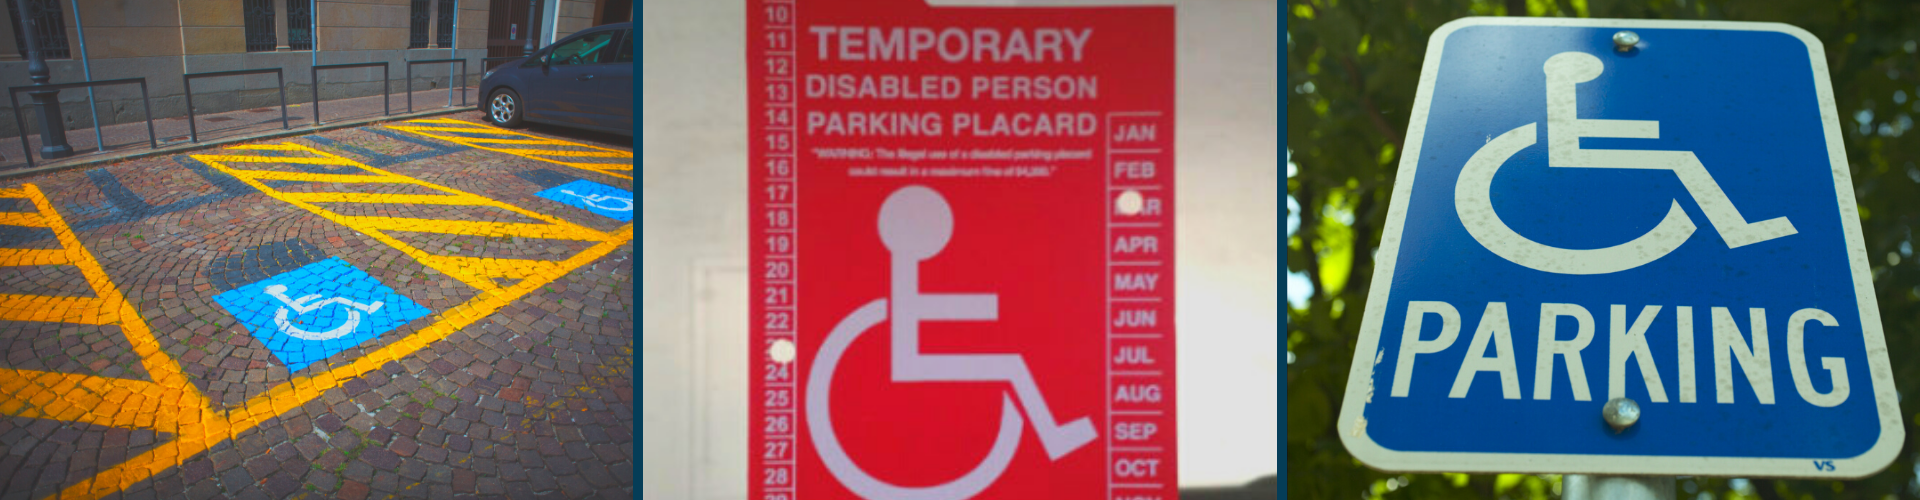 Banner images of Handicapped parking spots, placard, and sign